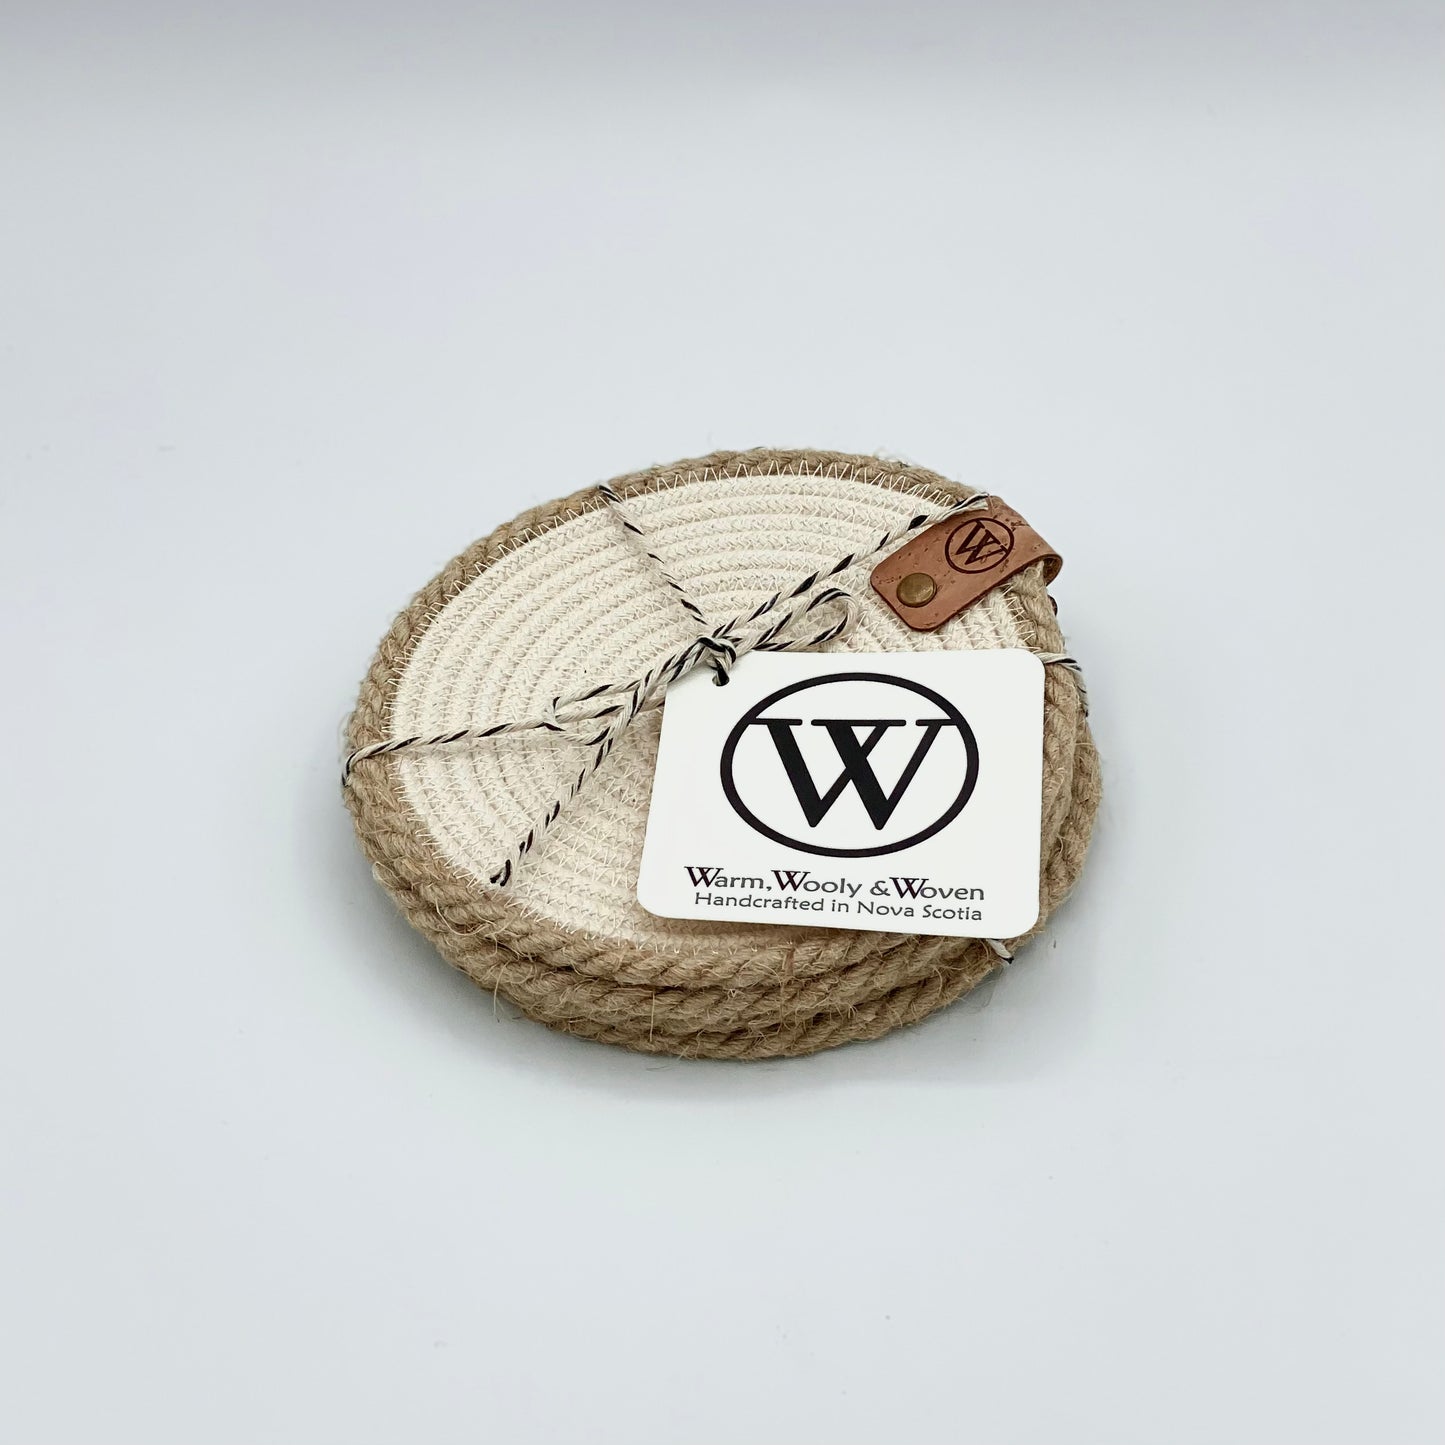 Coasters by Warm, Wooly & Woven